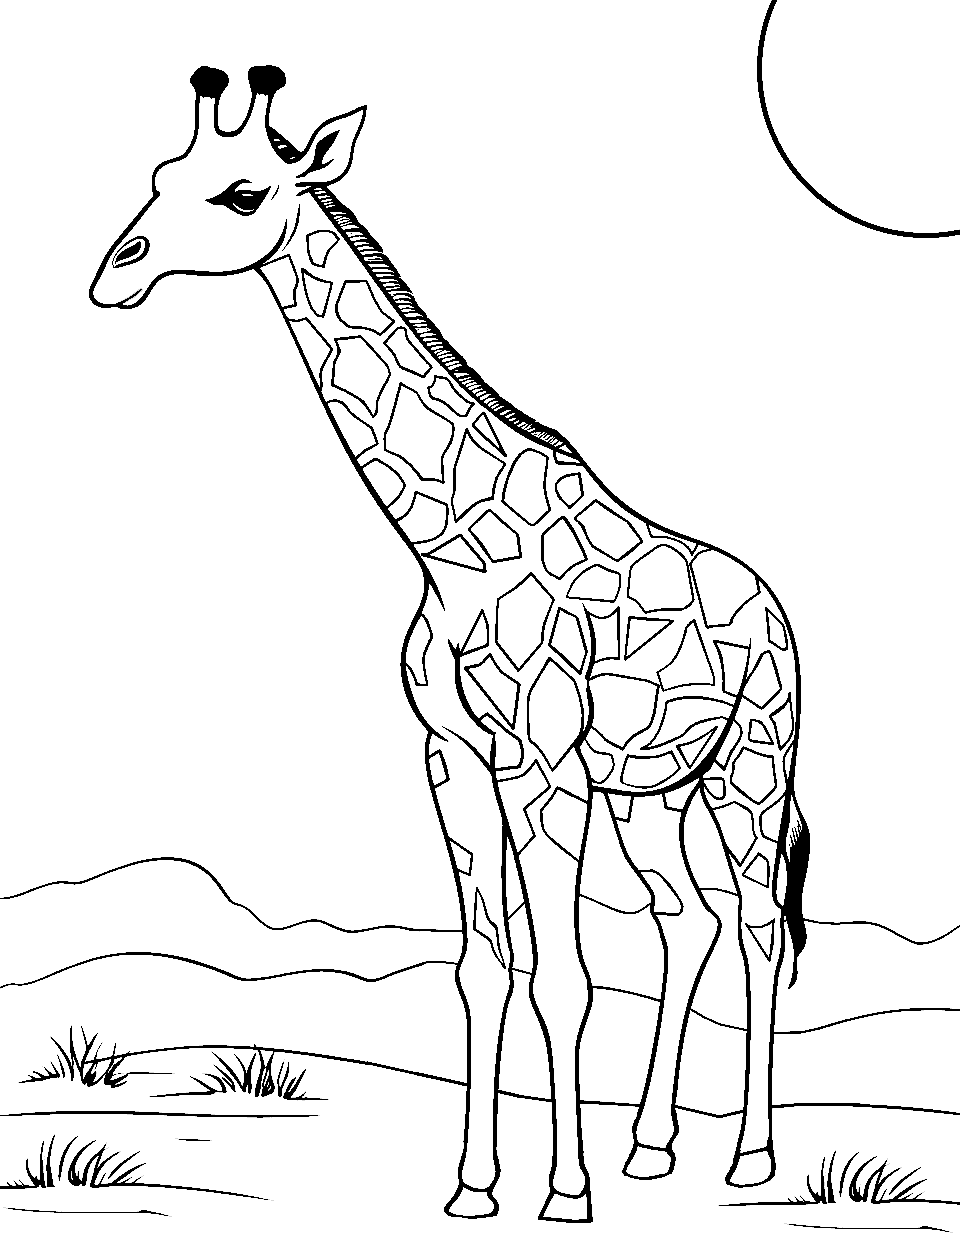 How To Draw A Giraffe For Kids, Step by Step, Drawing Guide, by Dawn -  DragoArt